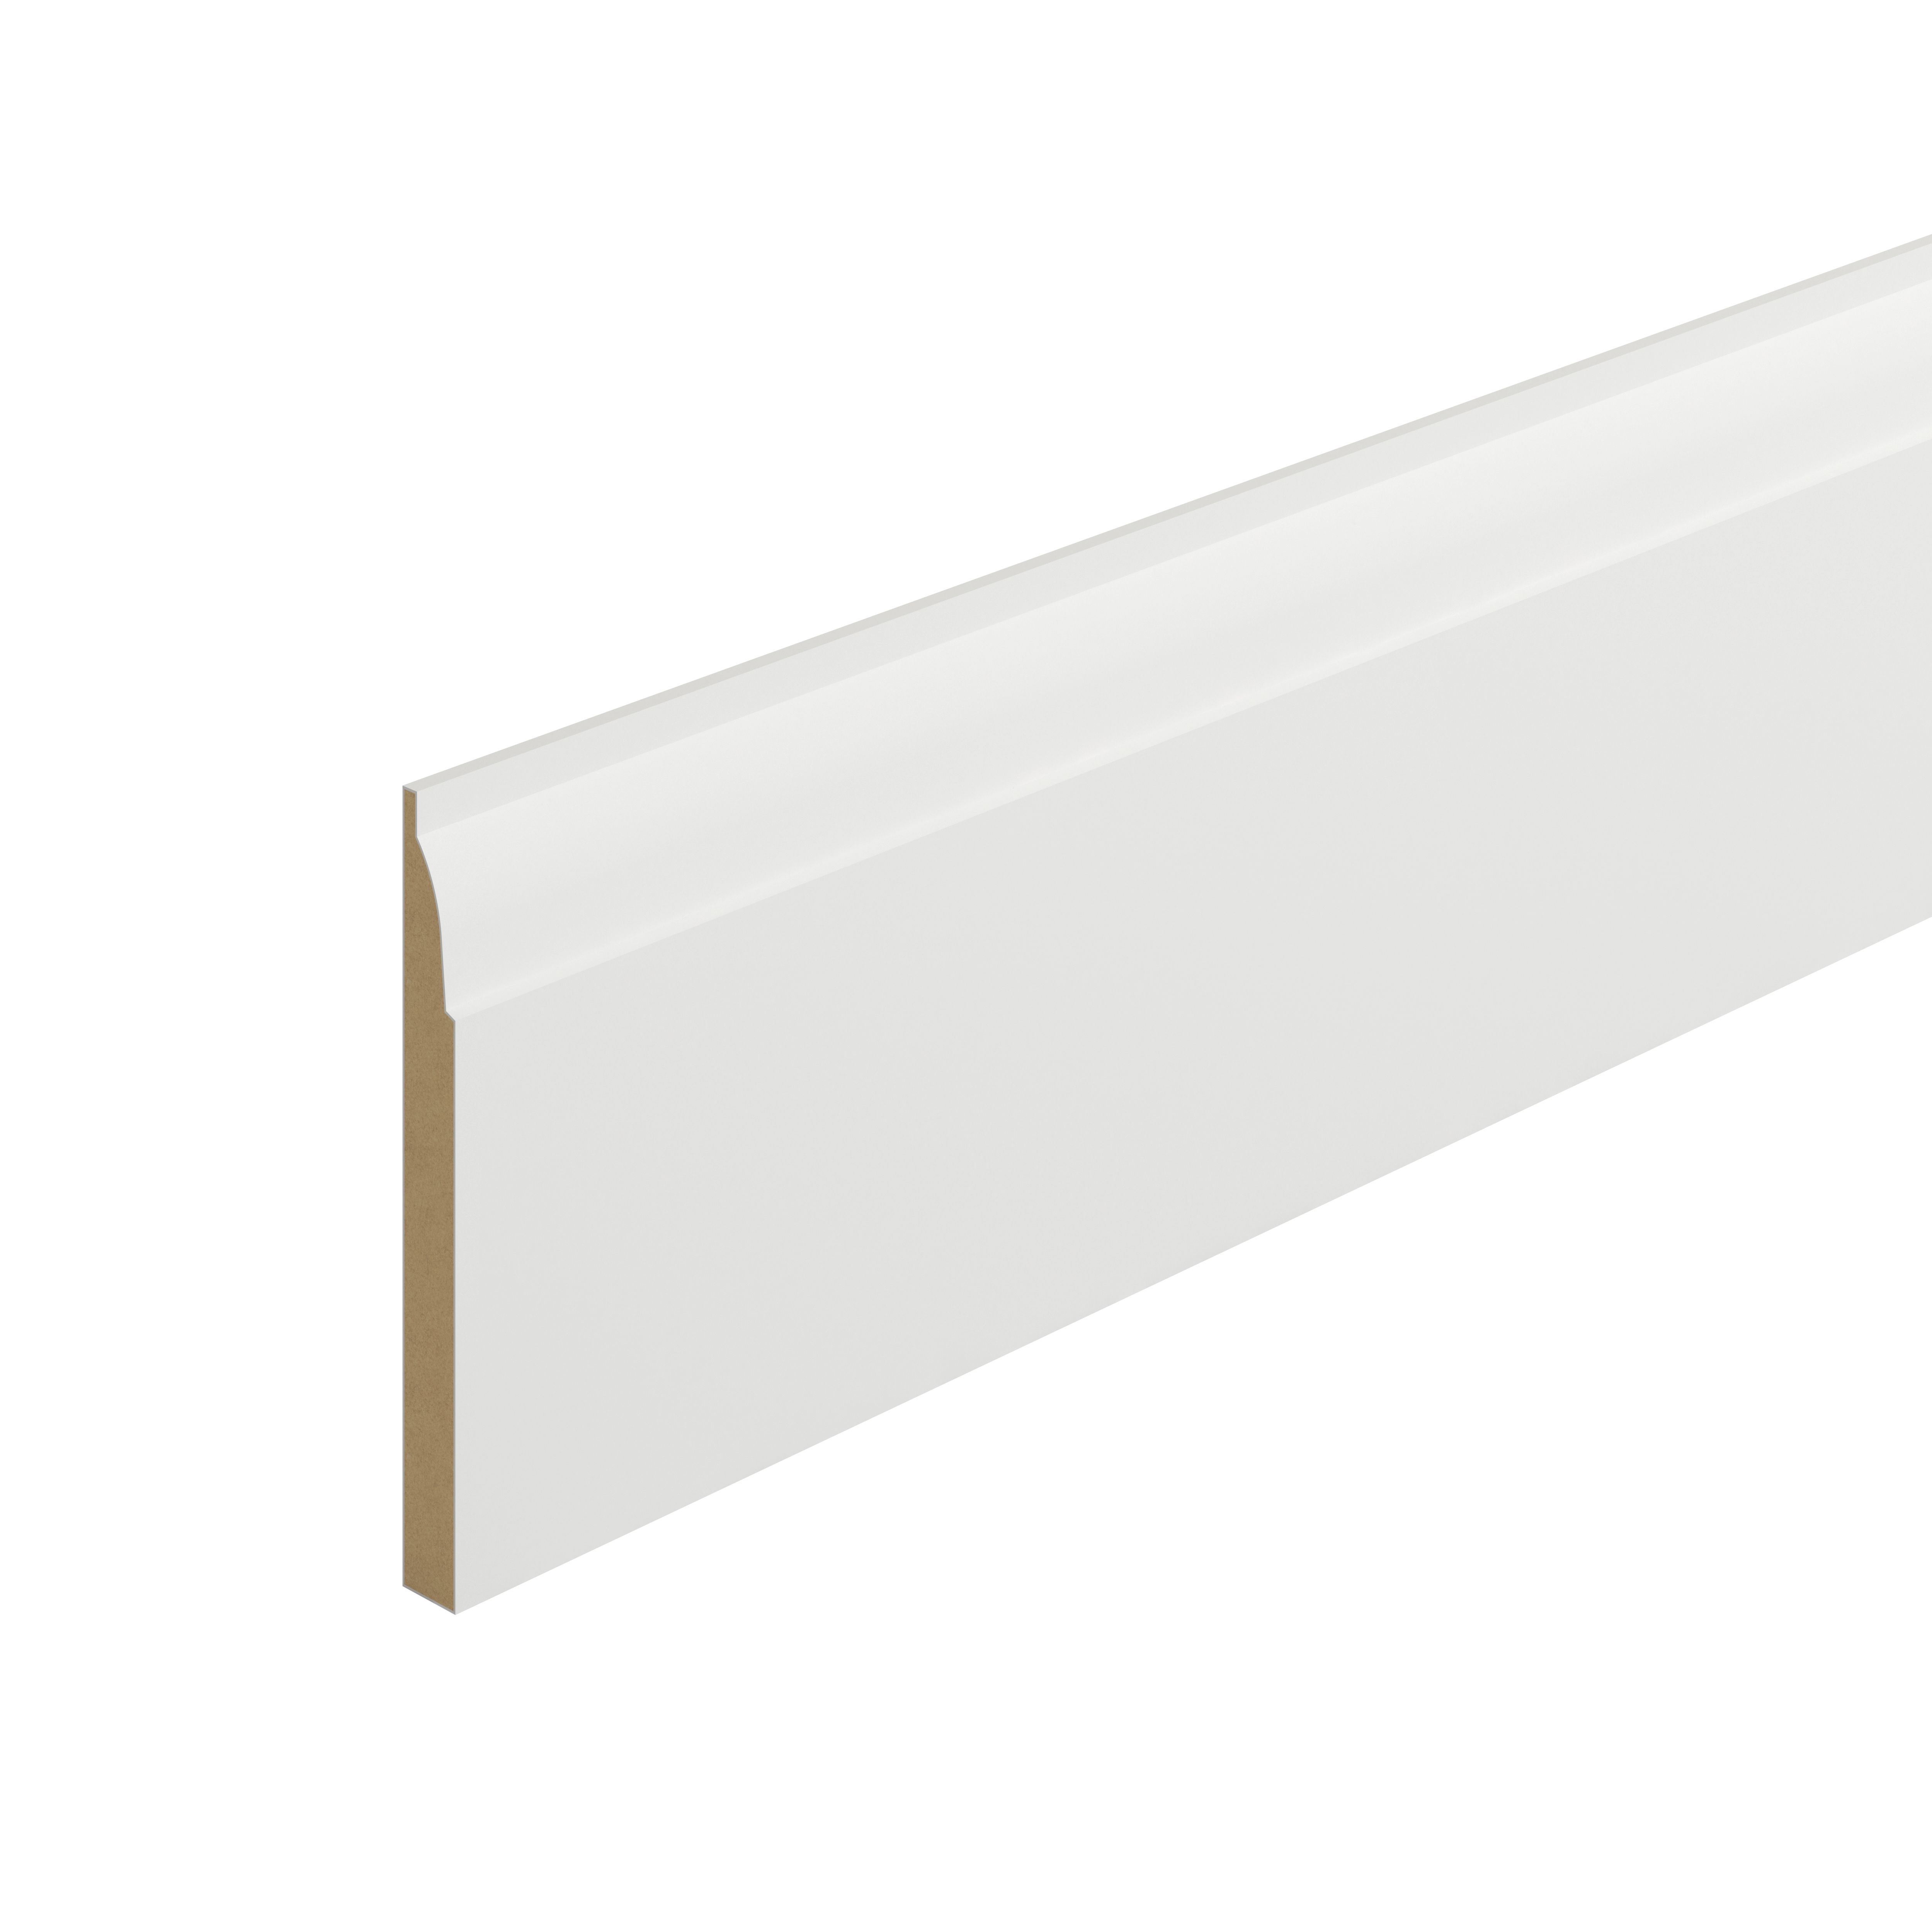 Metsä Wood Primed White MDF Ovolo Skirting board (L)2.4m (W)144mm (T)14.5mm, Pack of 2